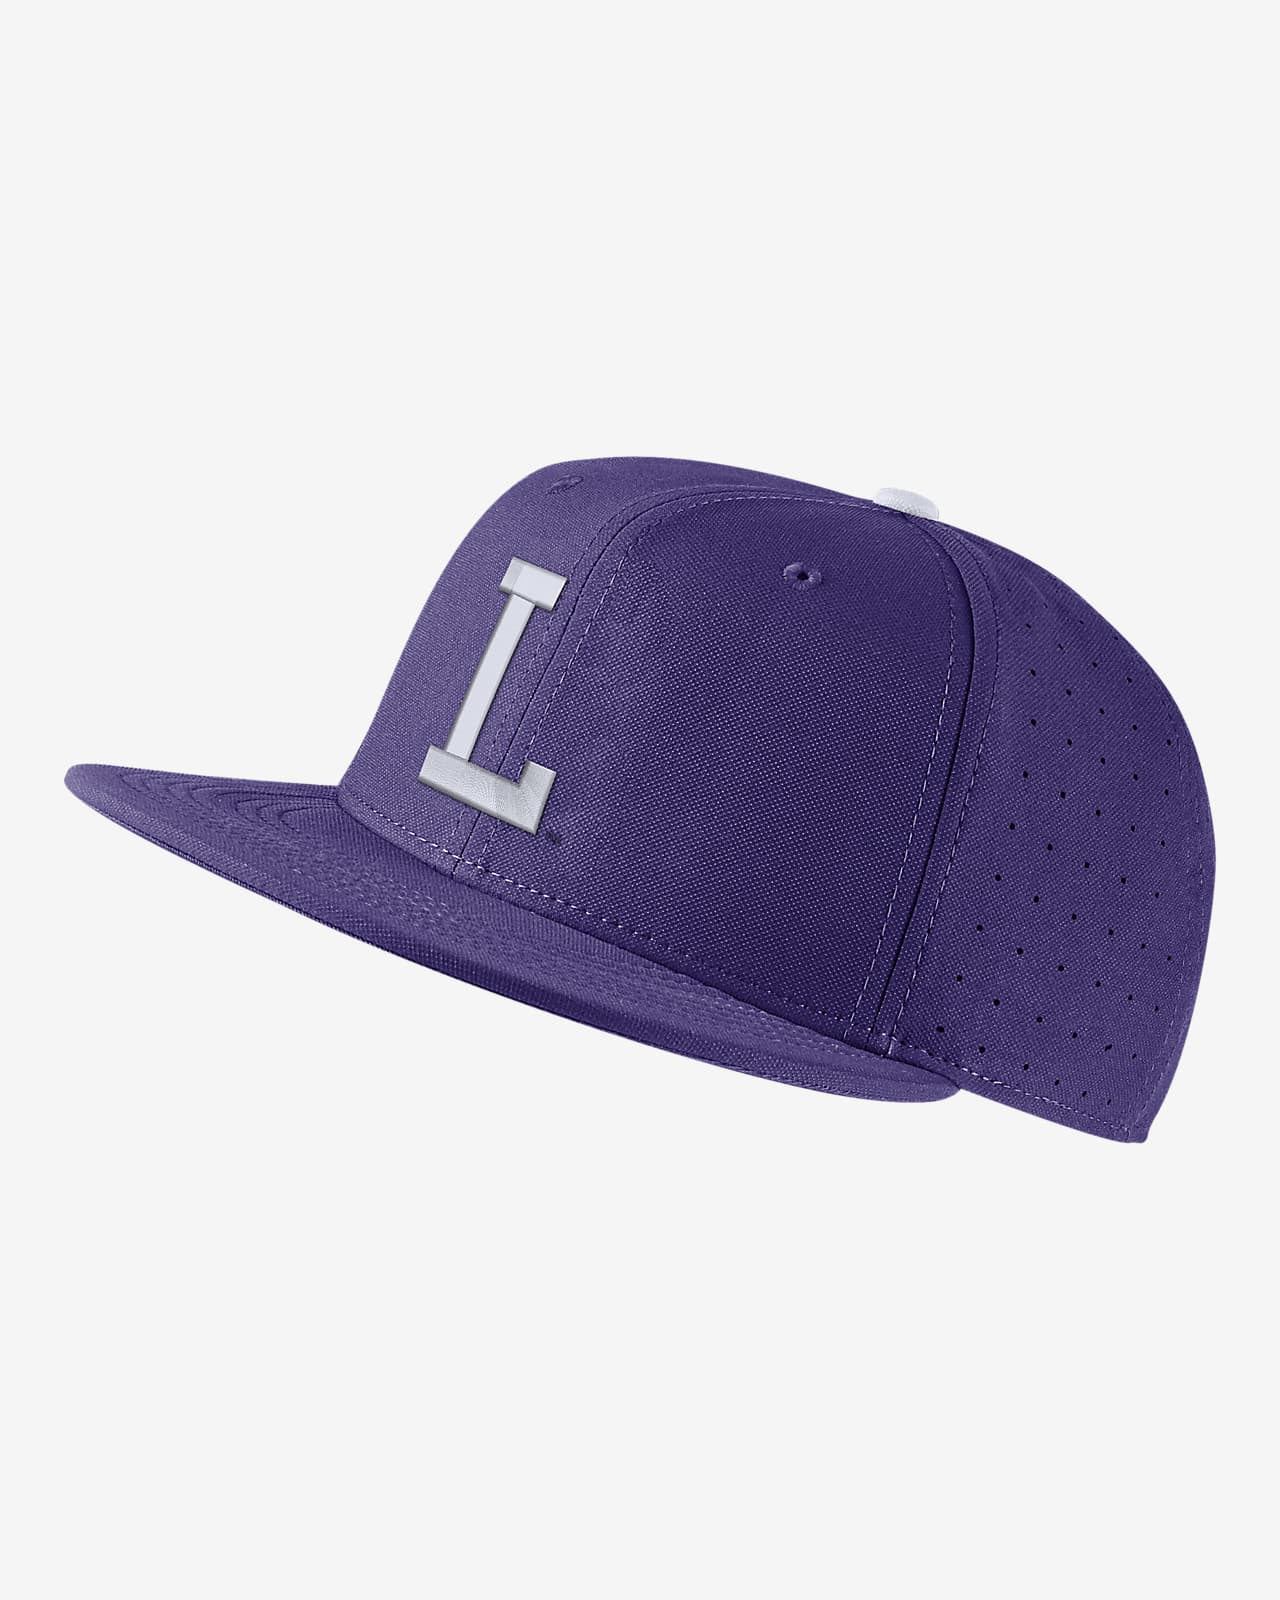 LSU Nike College Fitted Baseball Hat